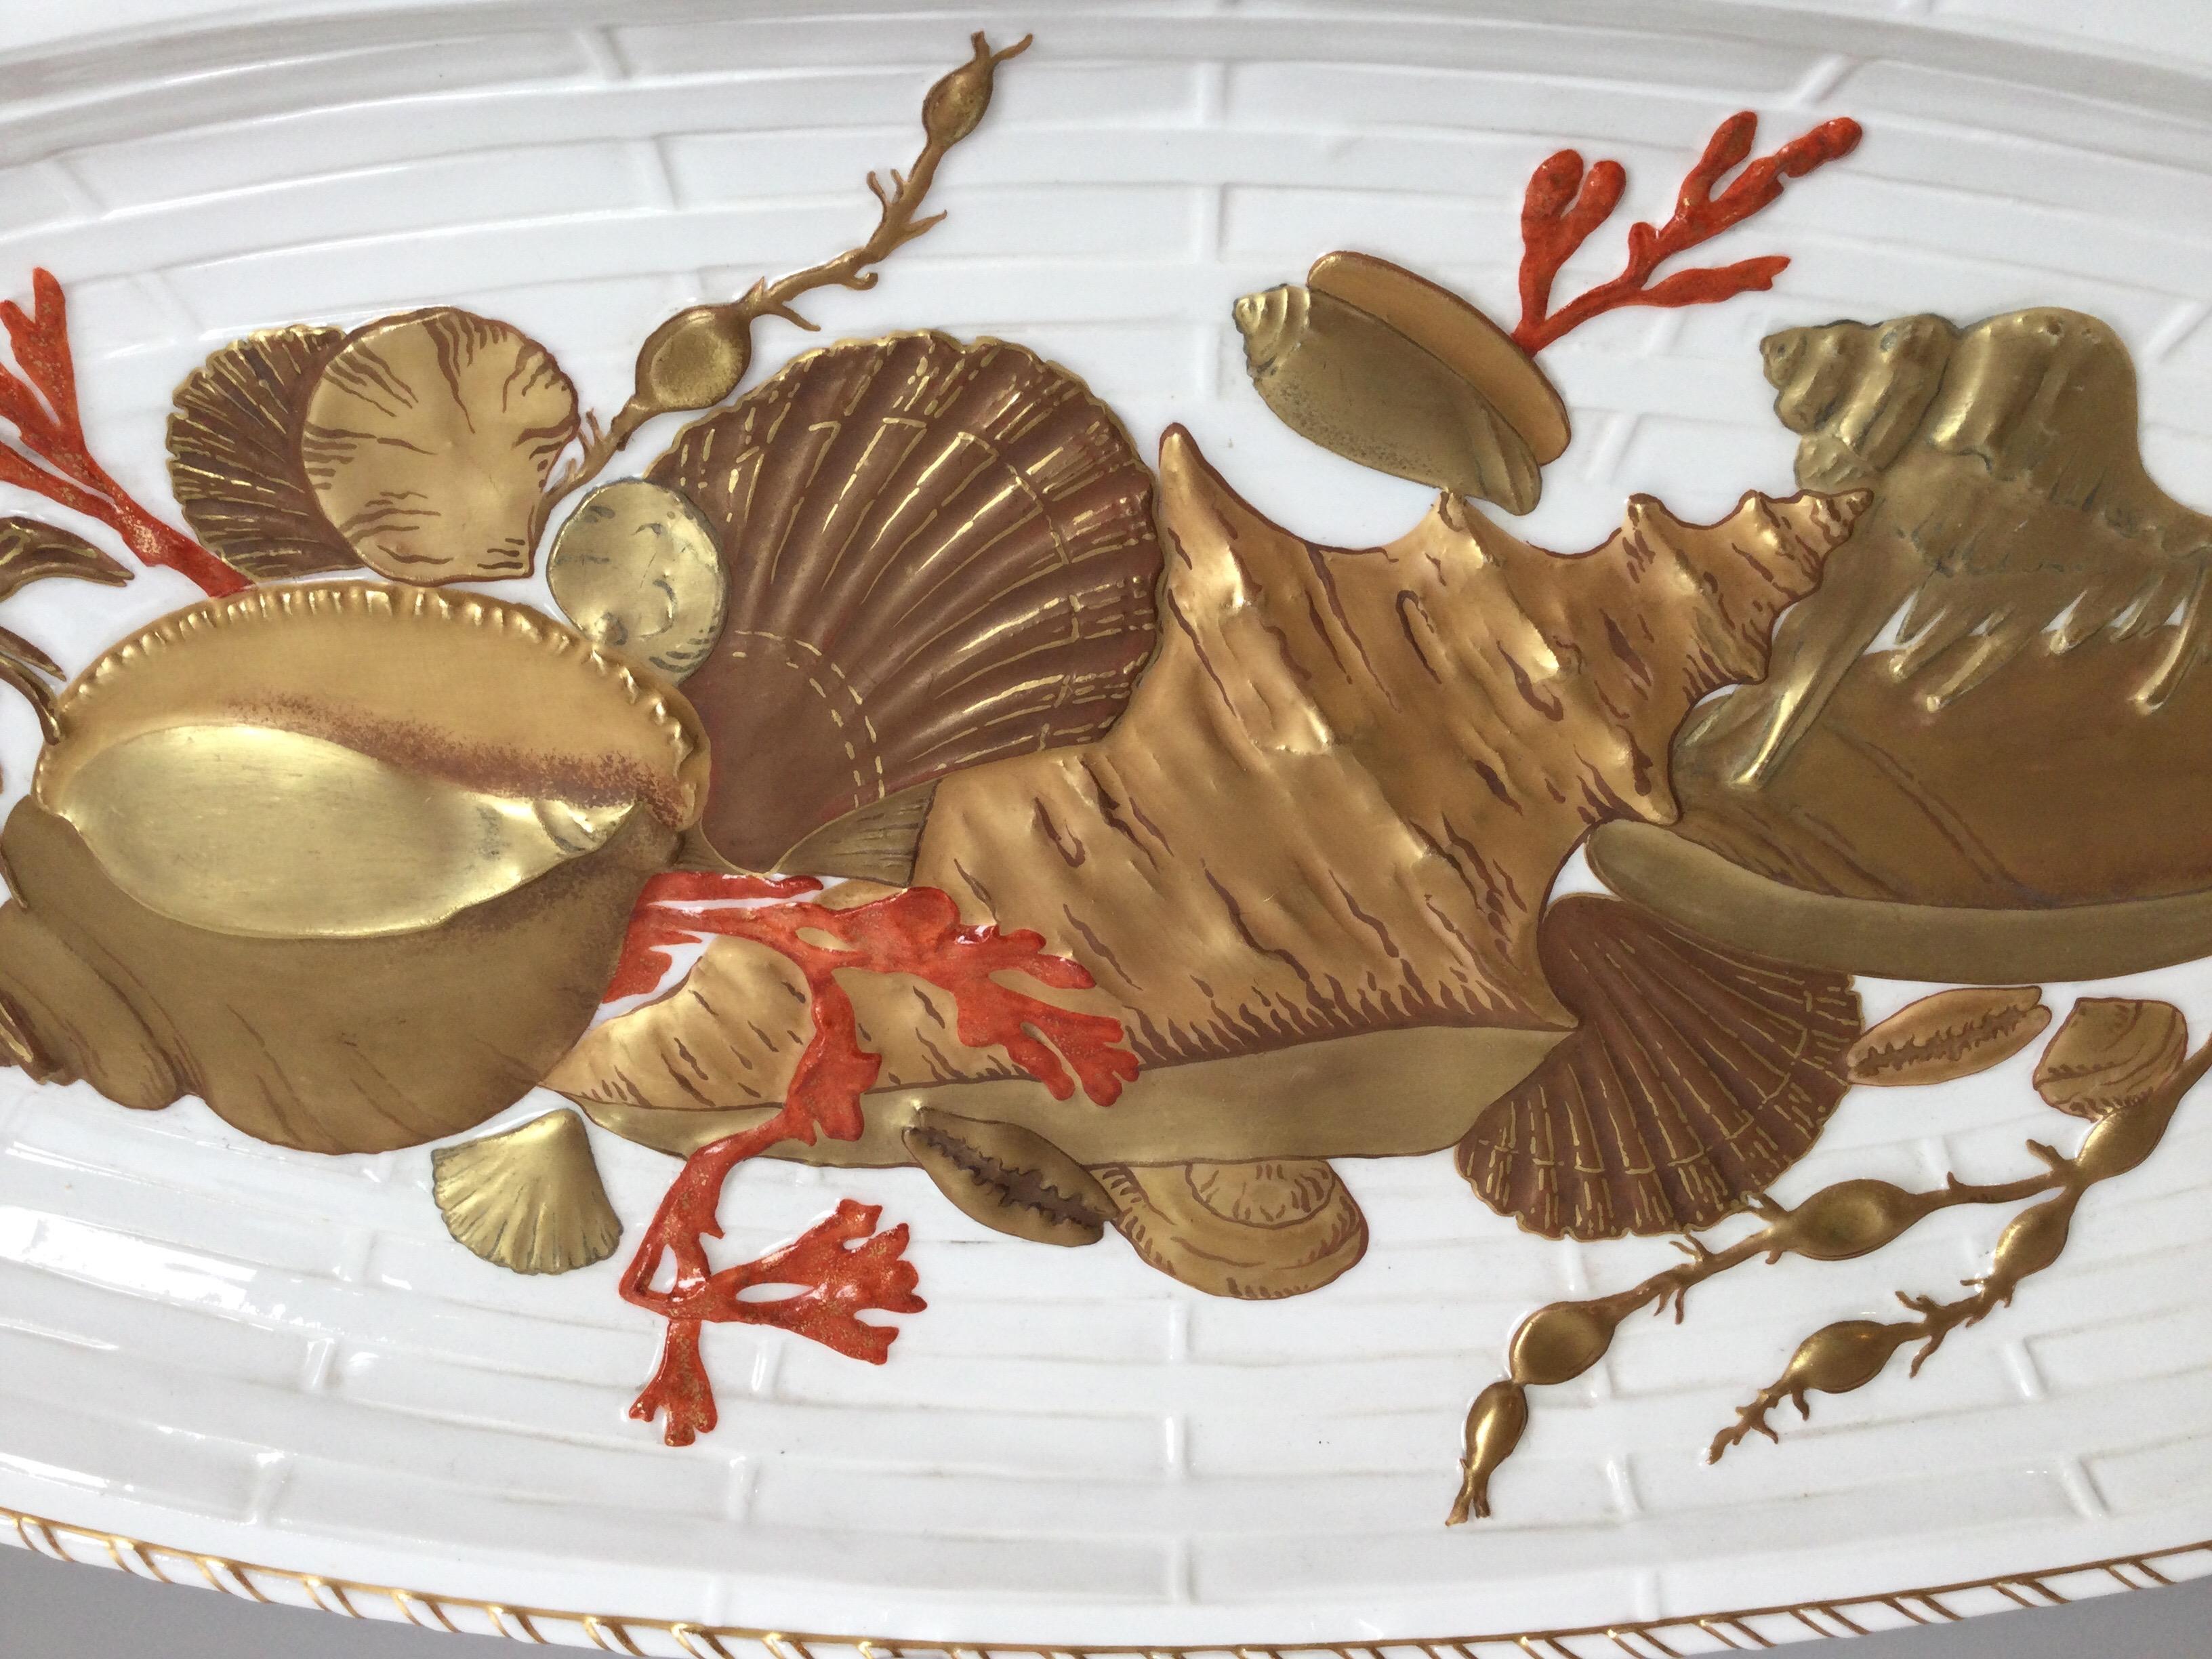 Unusual English porcelain hand painted fish platter attributed to Wedgwood 1880s.  the white glazed porcelain with three color gilt shell decoration with orange red coral highlights. The bowl of the platter with high relief three dimensional